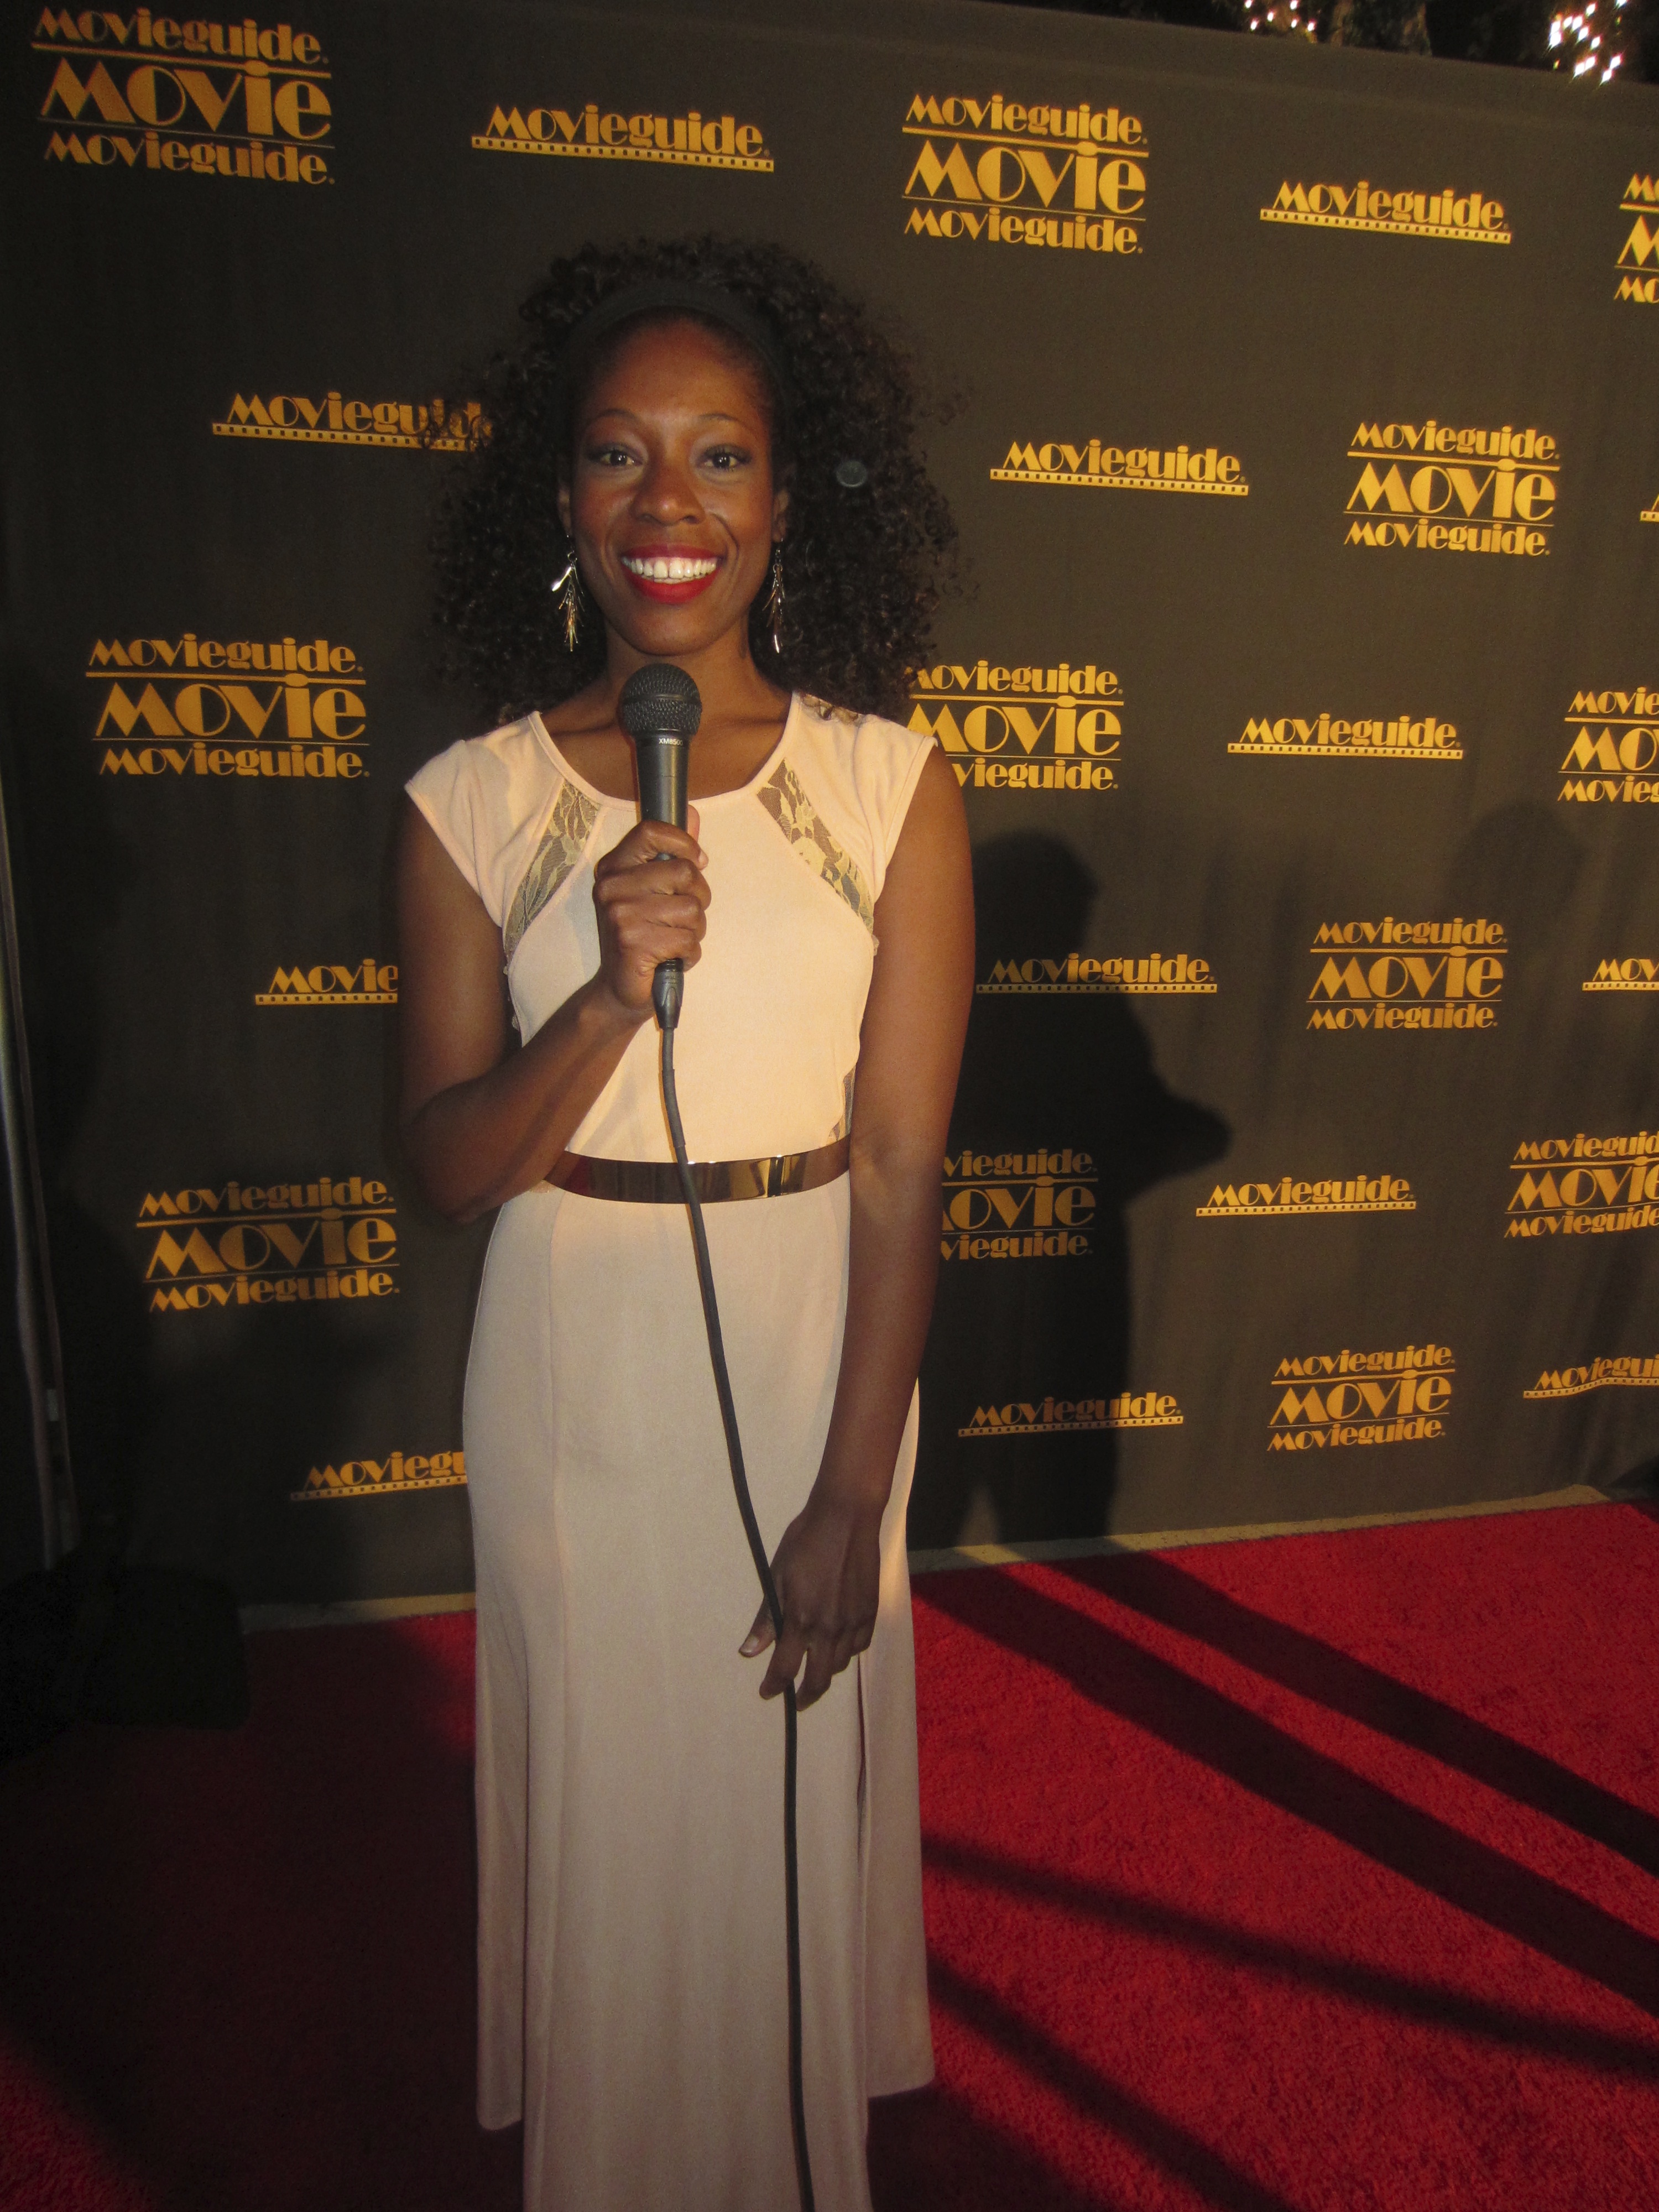 Host of Studio 3 Hollywood, Tysha live on the red carpet at the Movie Guide Awards